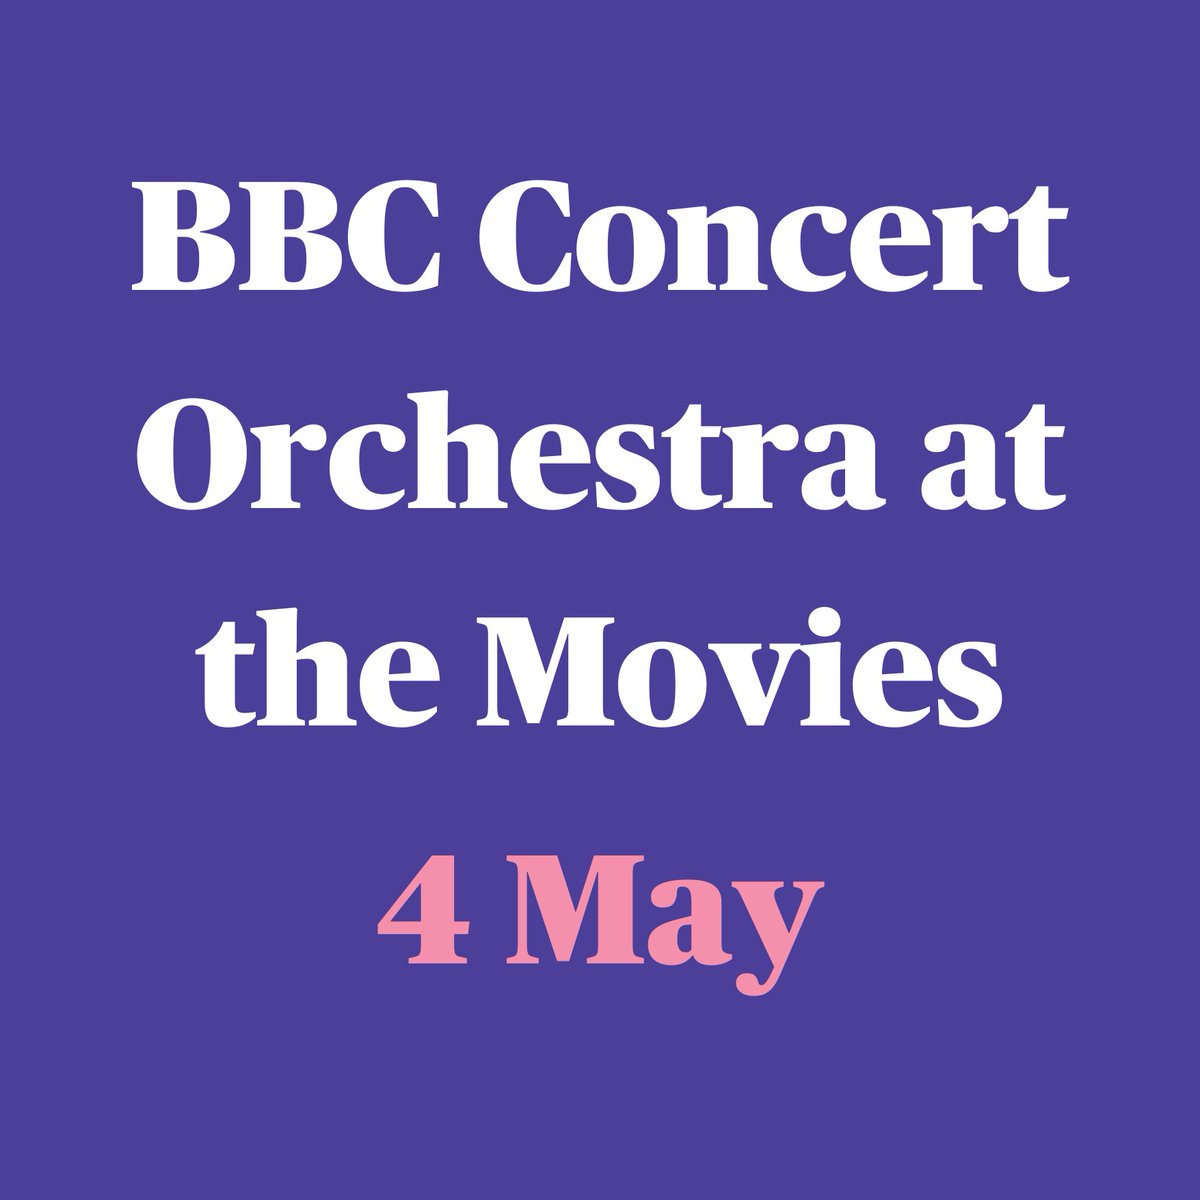 Sat 4 May... BBC Concert Orchestra returns to Saffron Hall! At the Movies: A trademark mix of film scores and popular classics inspired by flight 💫 ❗Book Now❗Last few tickets remaining⬇️ ow.ly/2JZG50RteZ4 #BBCConcertOrchestra #SaffronHall #FilmScores #PopularClassics